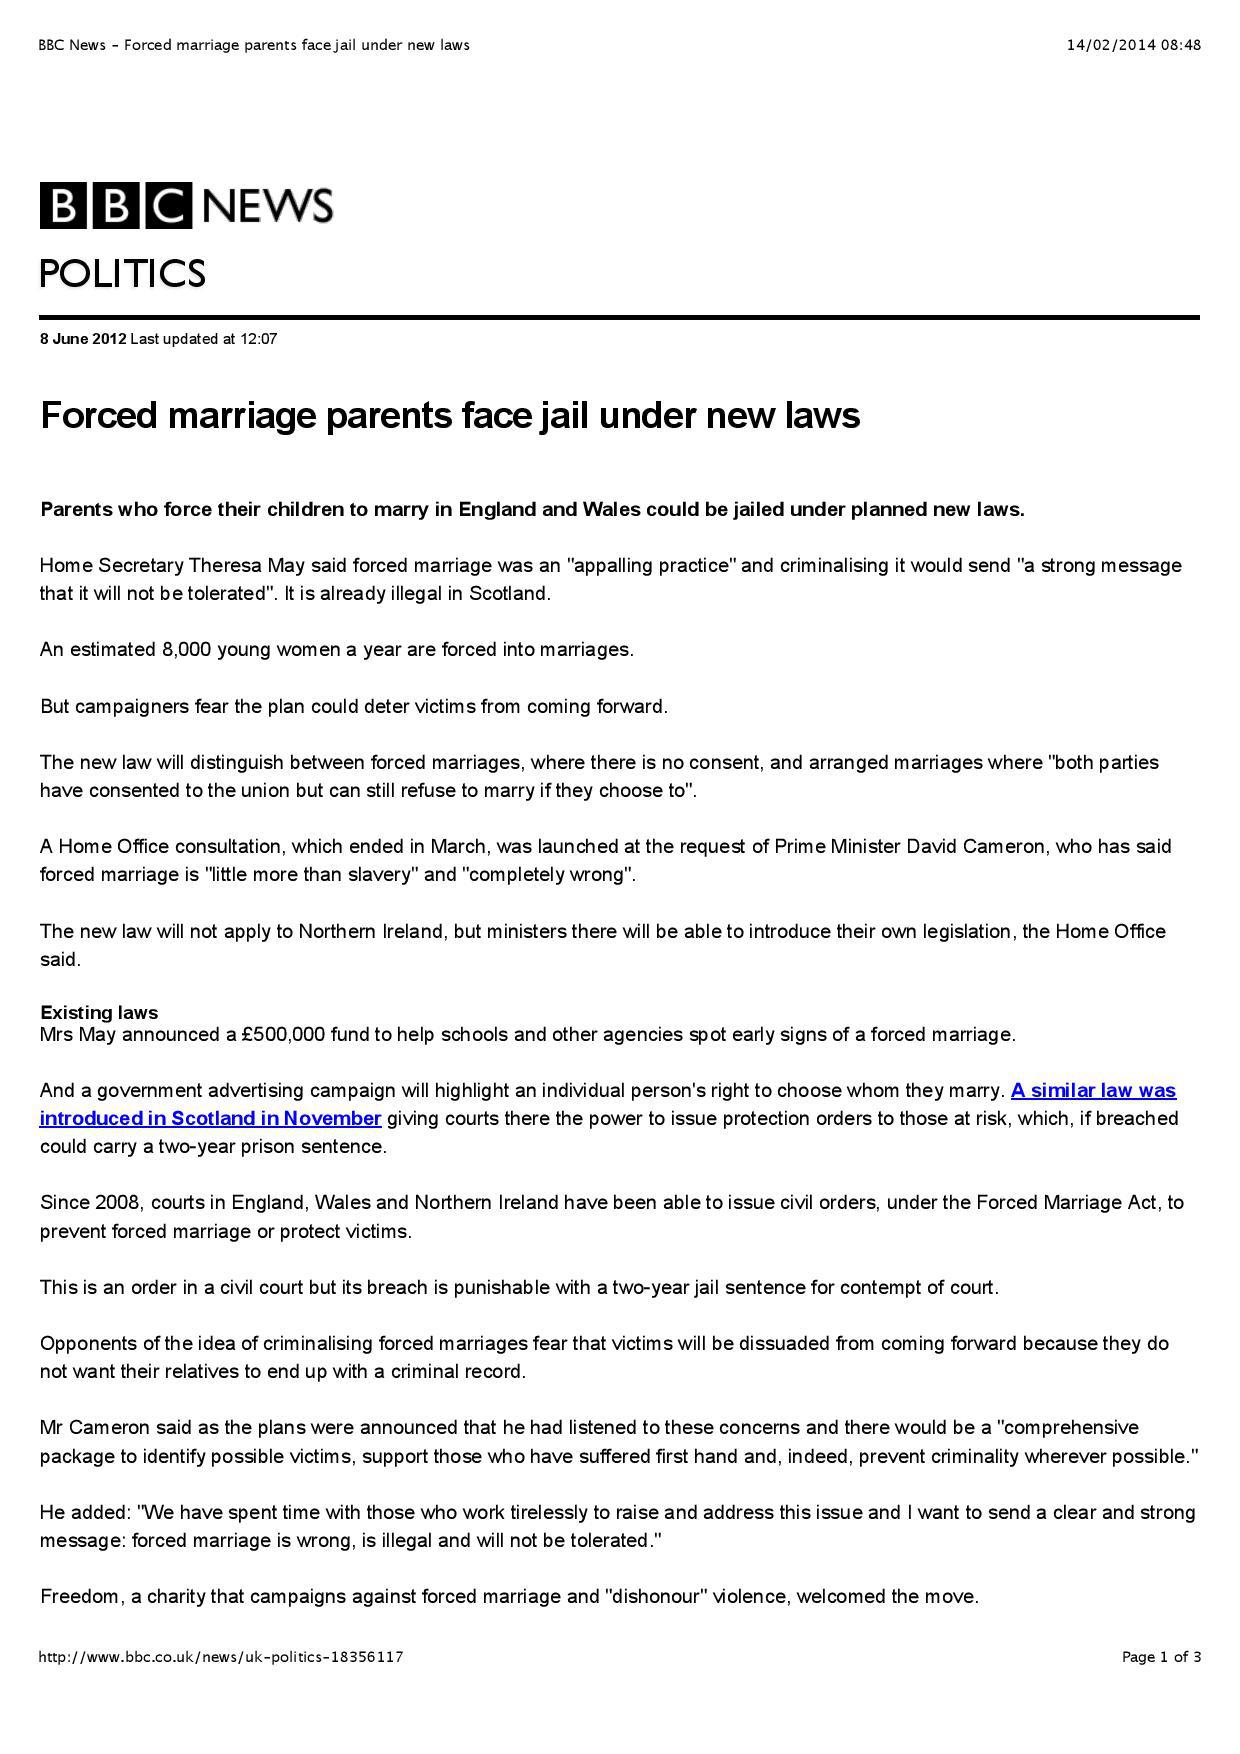 done-bbc-news-forced-marriage-parents-face-jail-under-new-laws-page-001